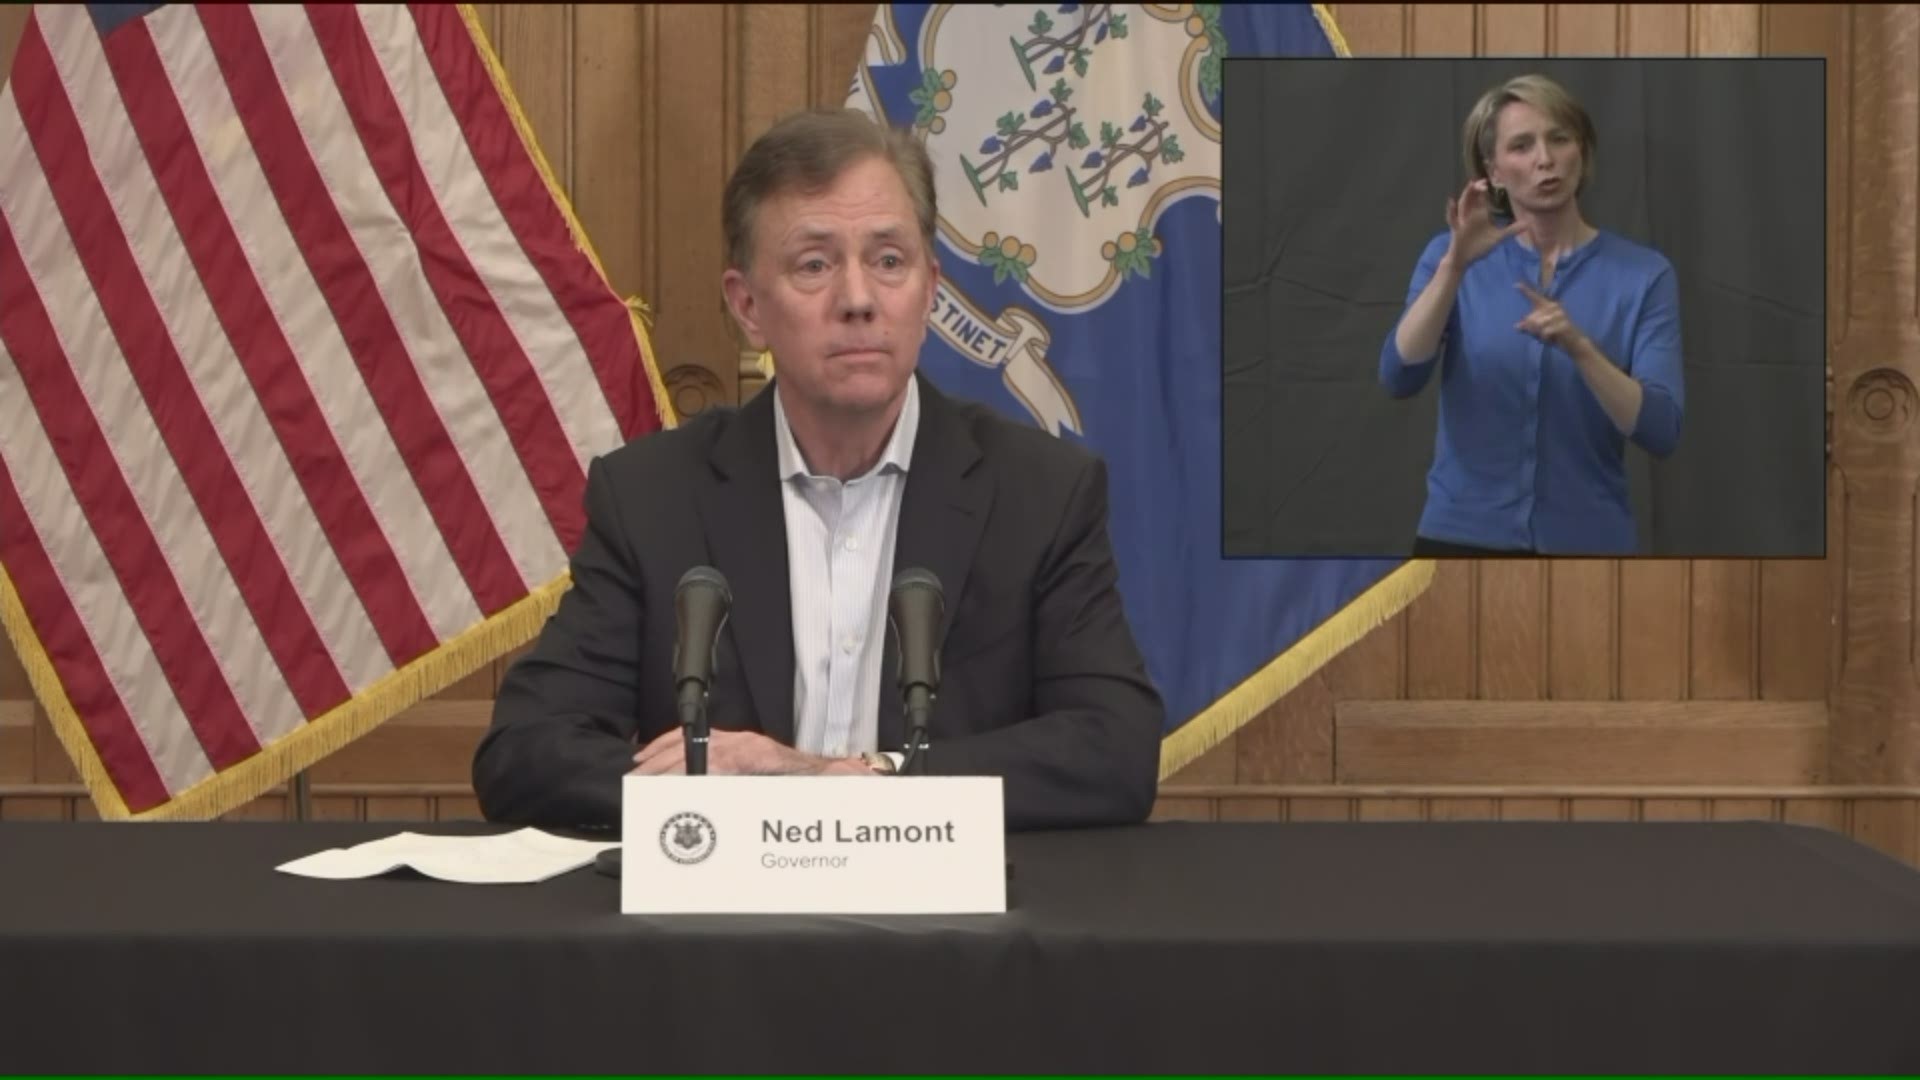 FOX61's Brian Didlake asks Gov. Lamont if residents can expect to see the National Guard regulating out-of-staters coming into CT similar to Rhode Island.